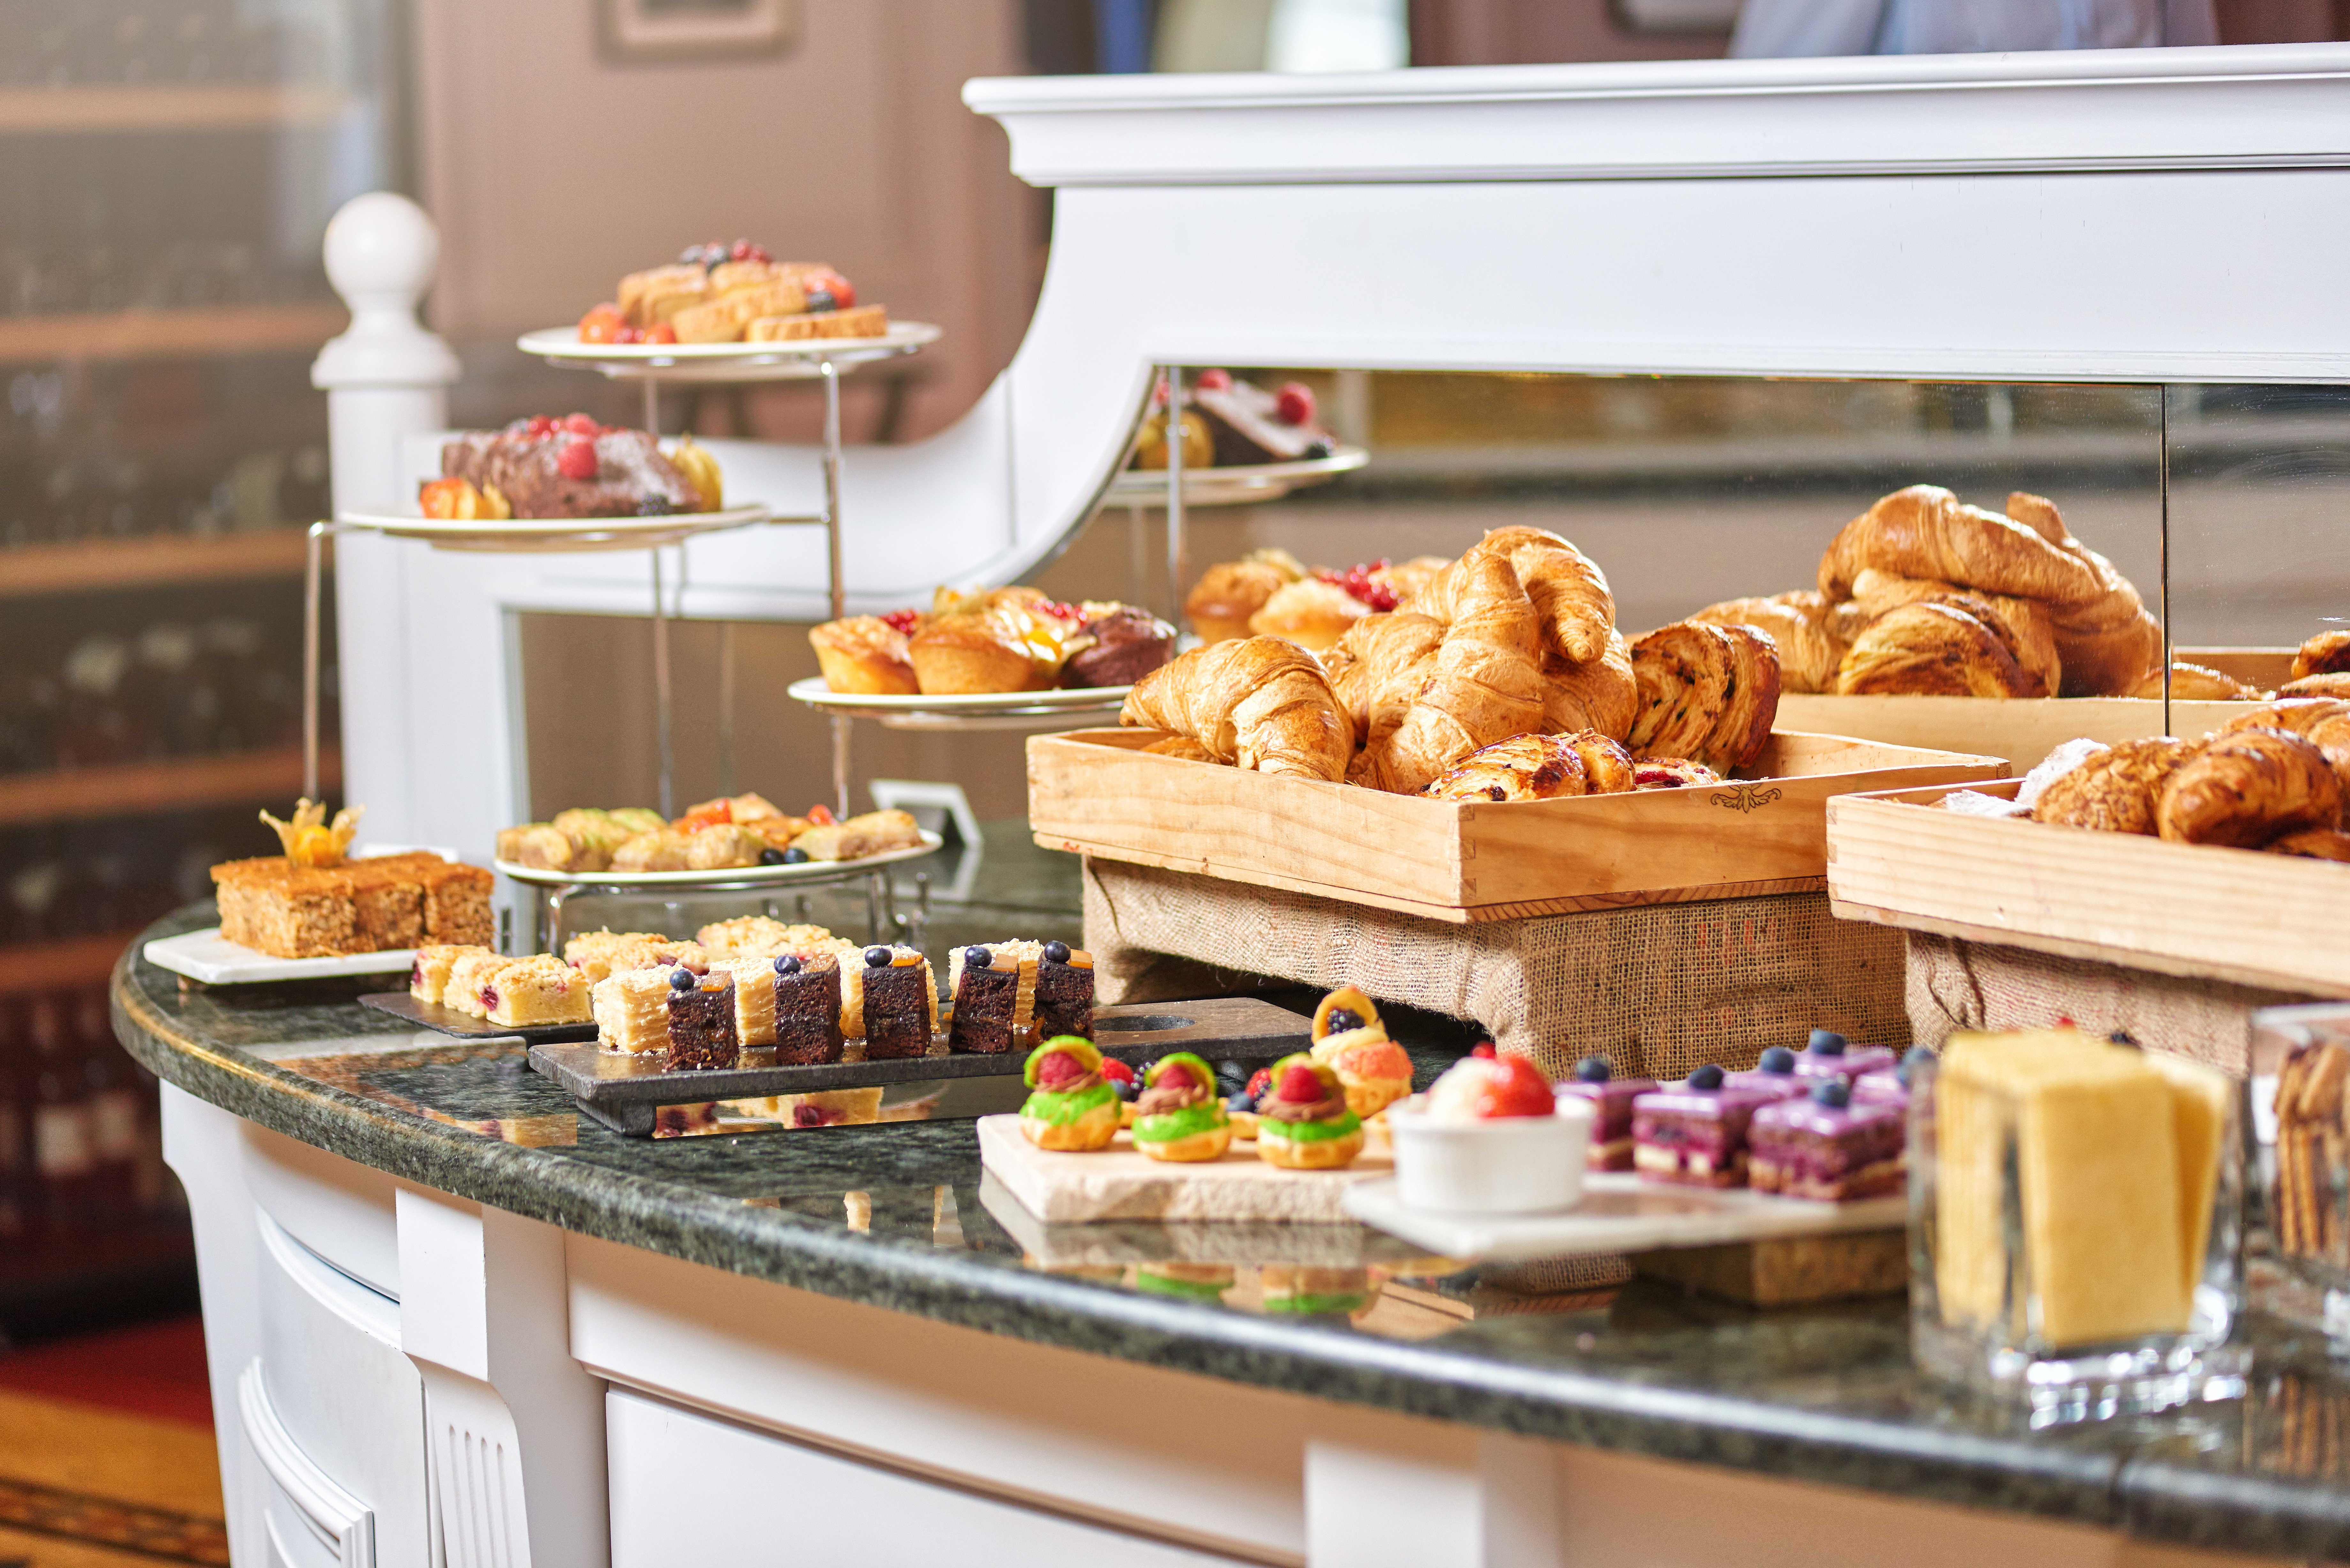 Bread and pastries at a hotel breakfast | Source: Shutterstock